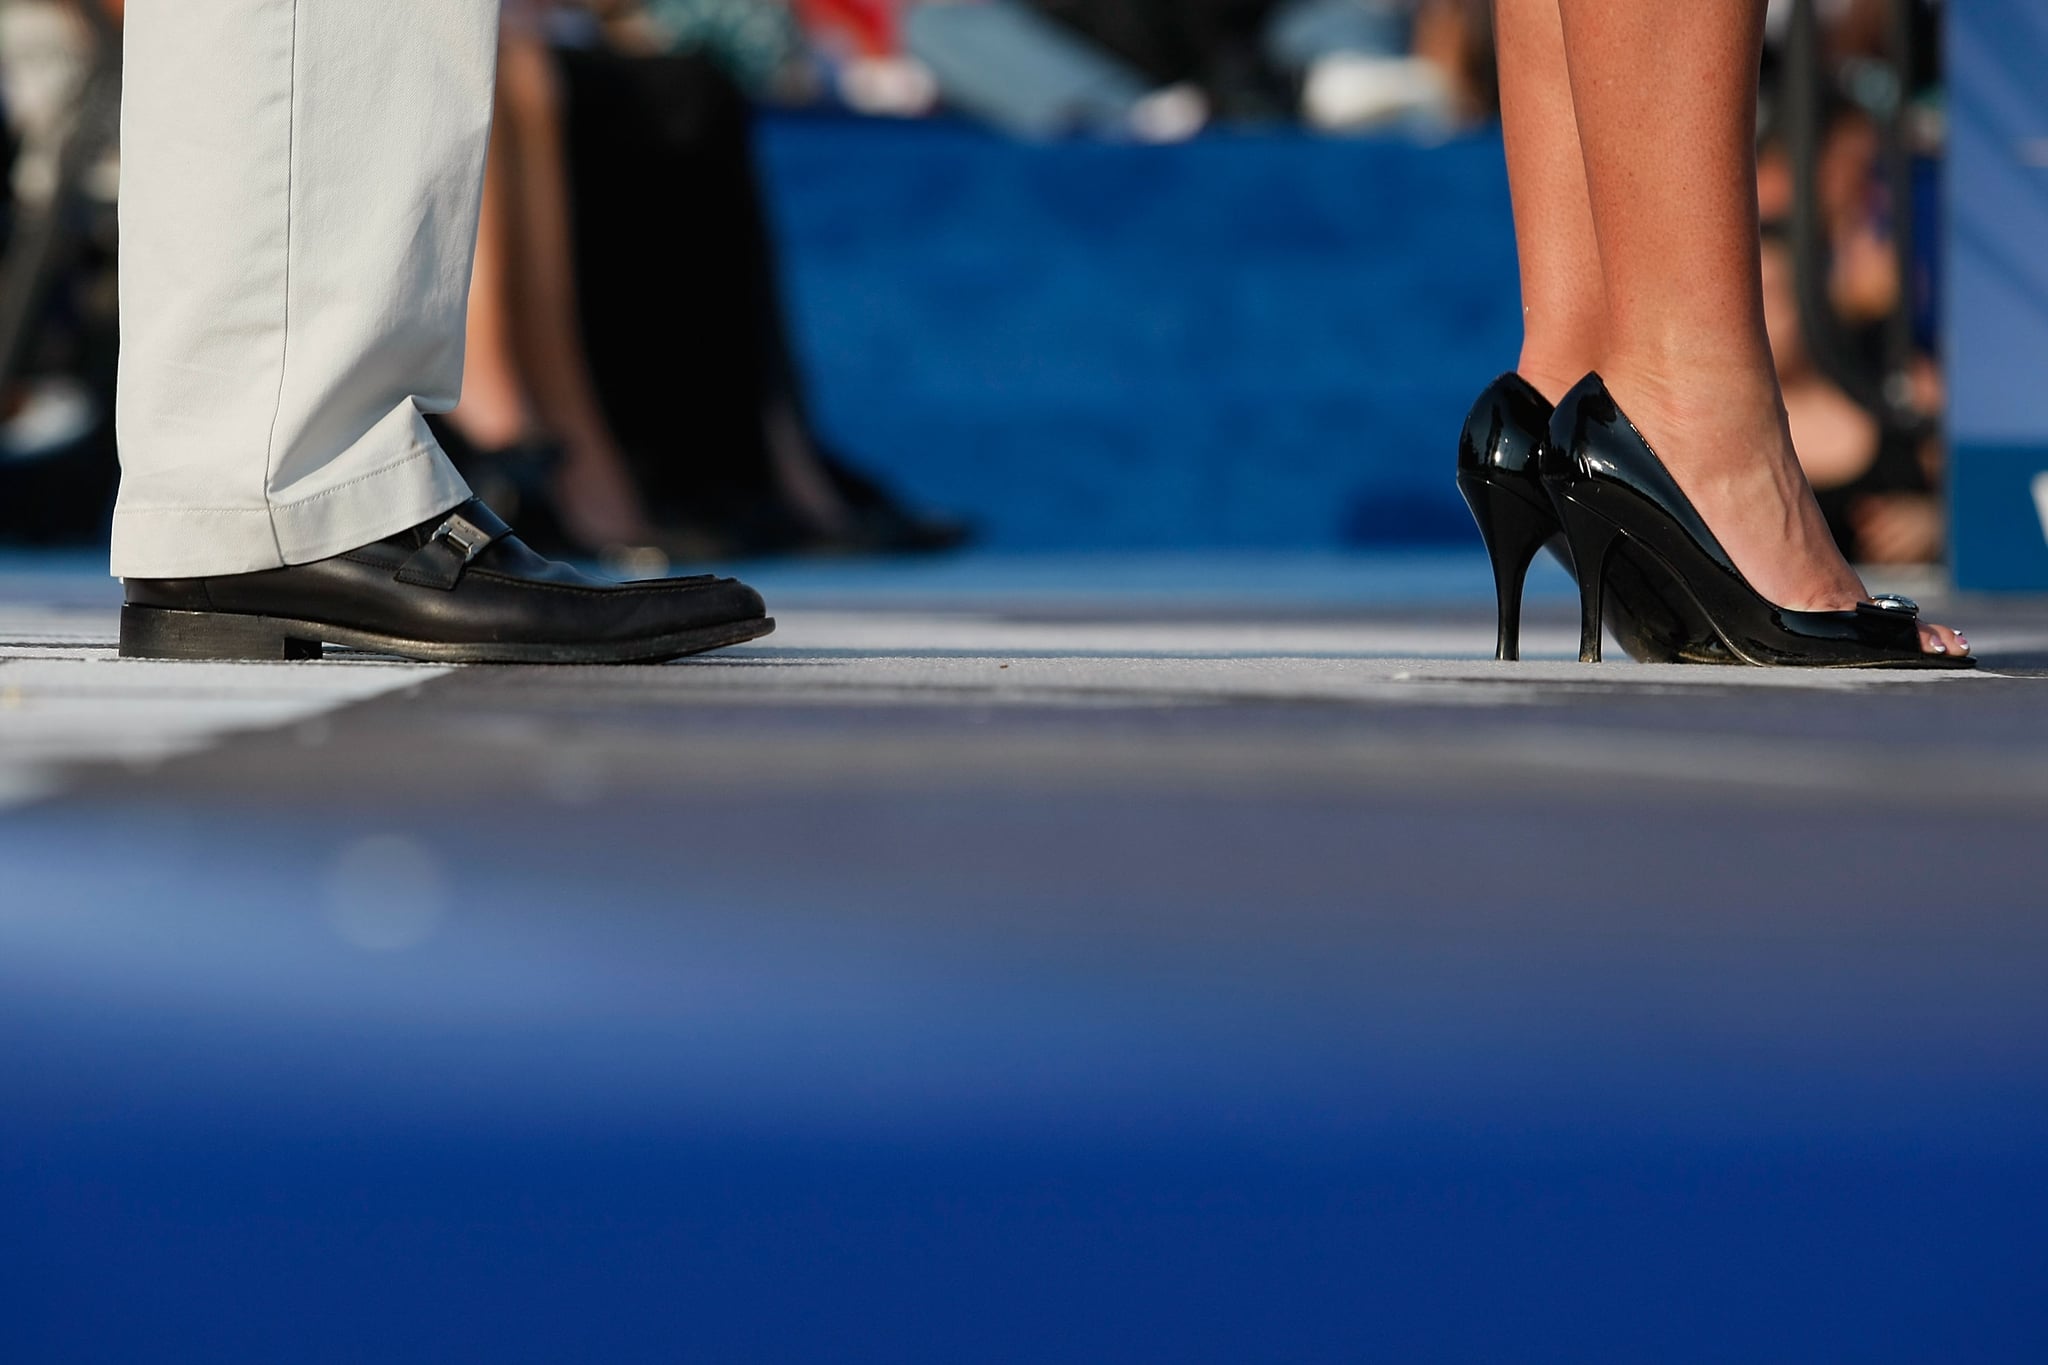 Subtle Sexism In Shots Of Sarah Palin S Shoes Popsugar Love And Sex